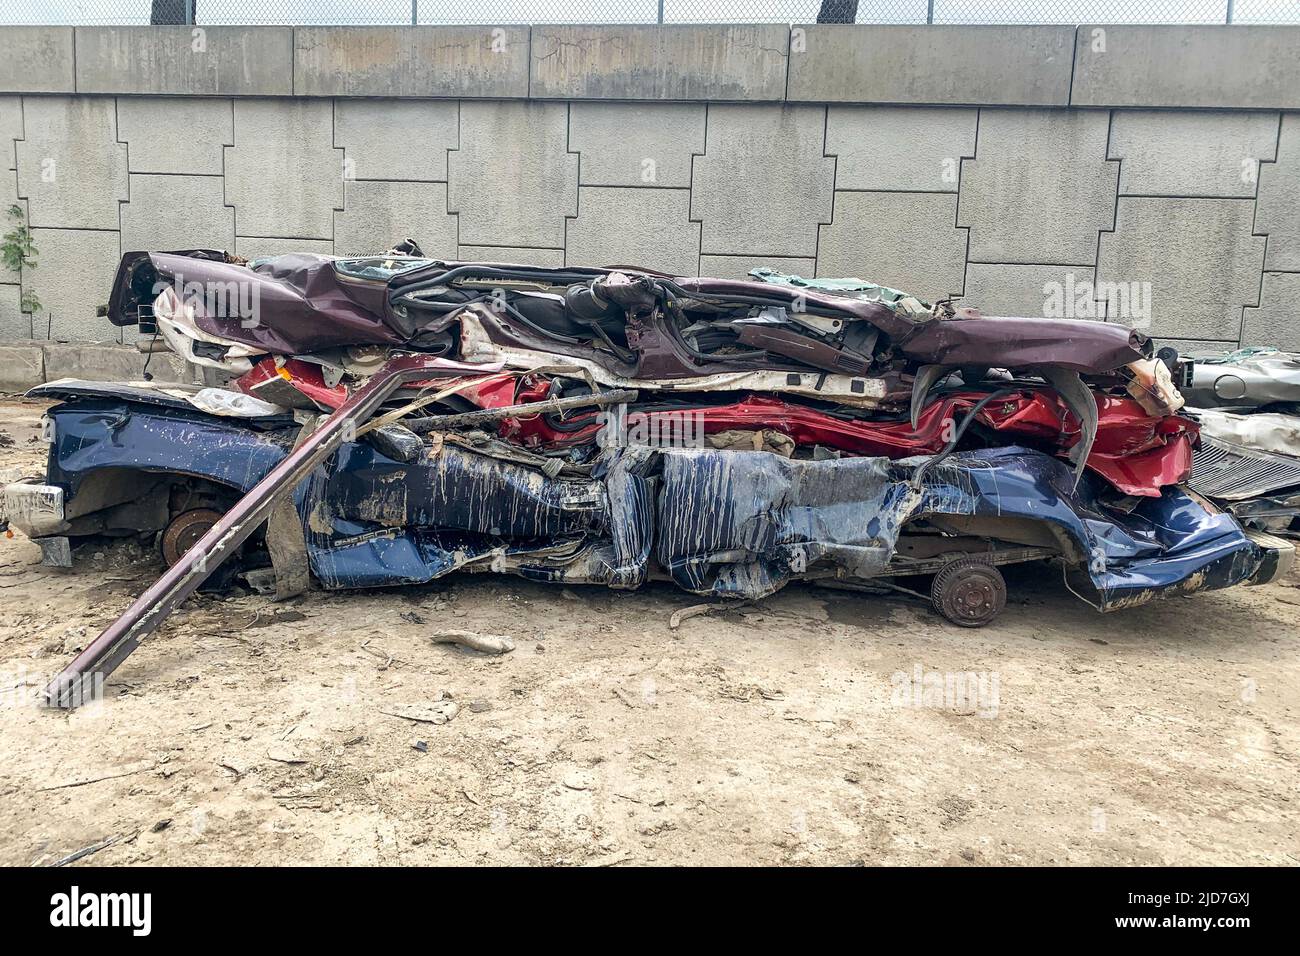 A pile of compressed cars going to be shredded, crushed junk vehicles on scrapyard Stock Photo